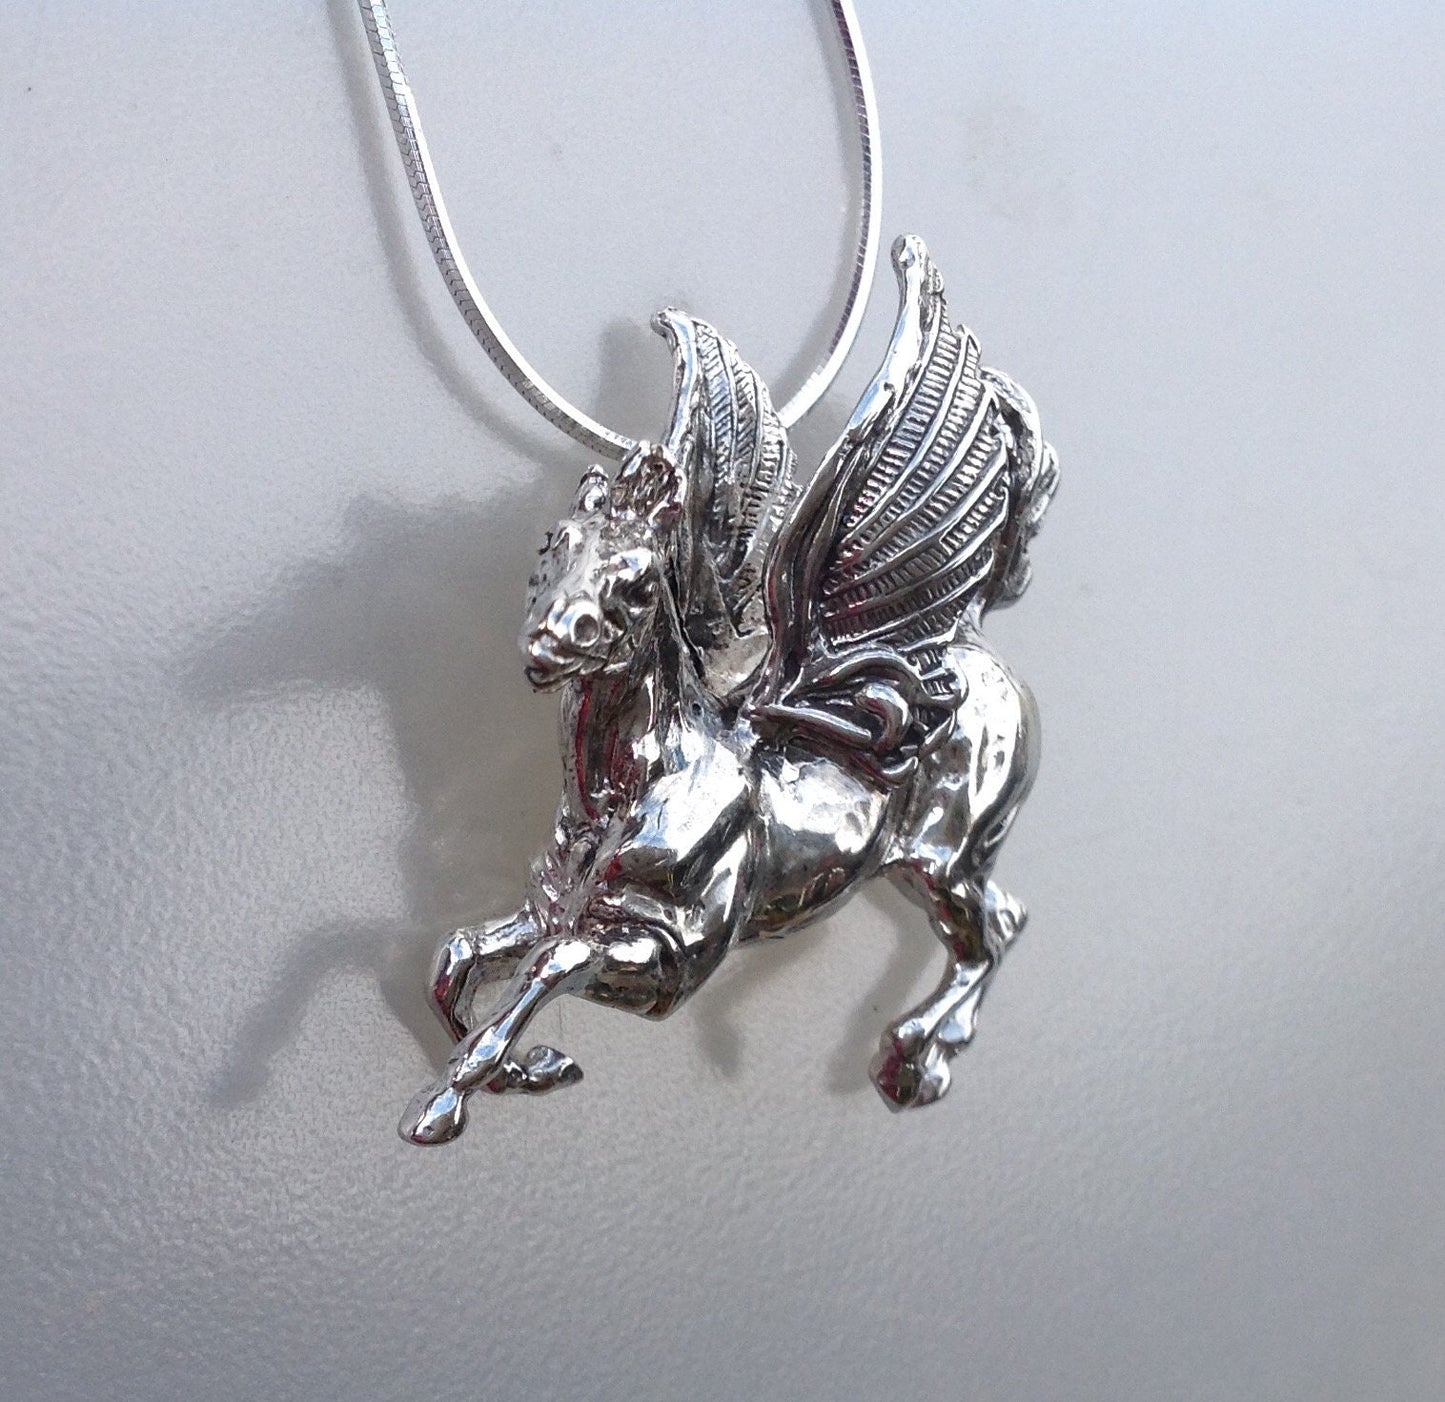 Extra LARGE Pegasus necklace pendant & chain sterling silver Handmade by Artist  Zimmer Horse Jewelry